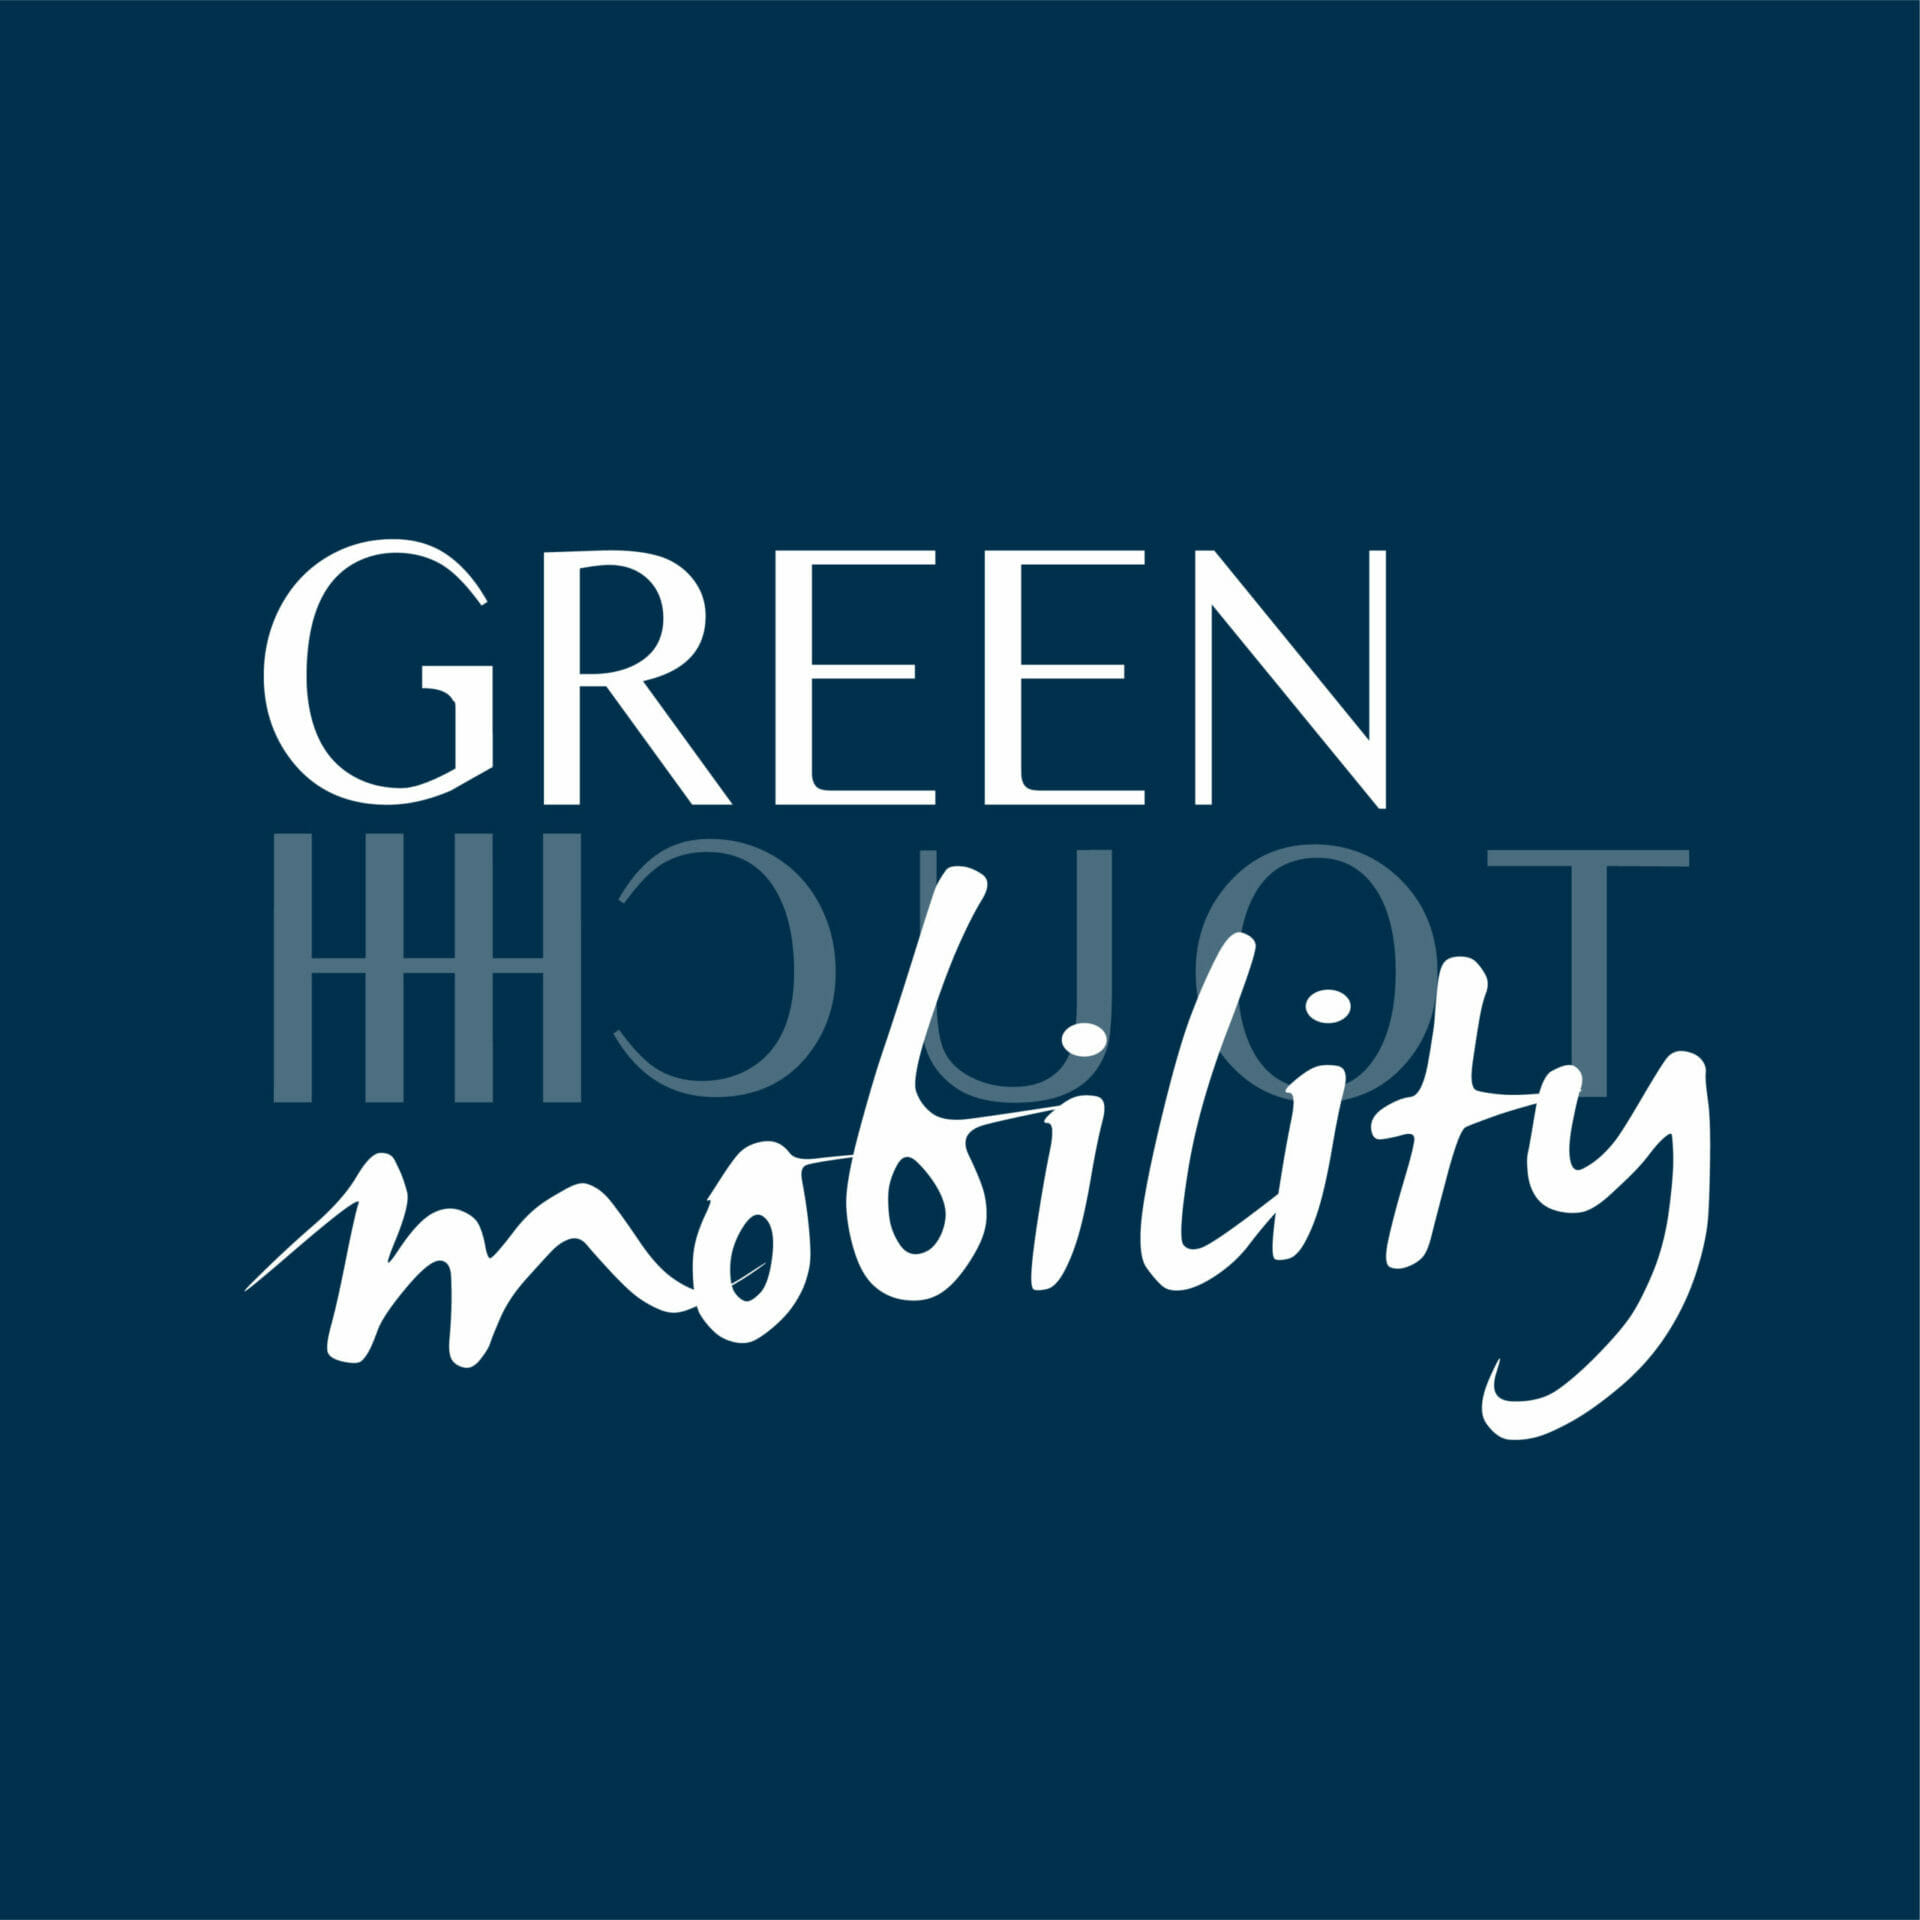 green mobility